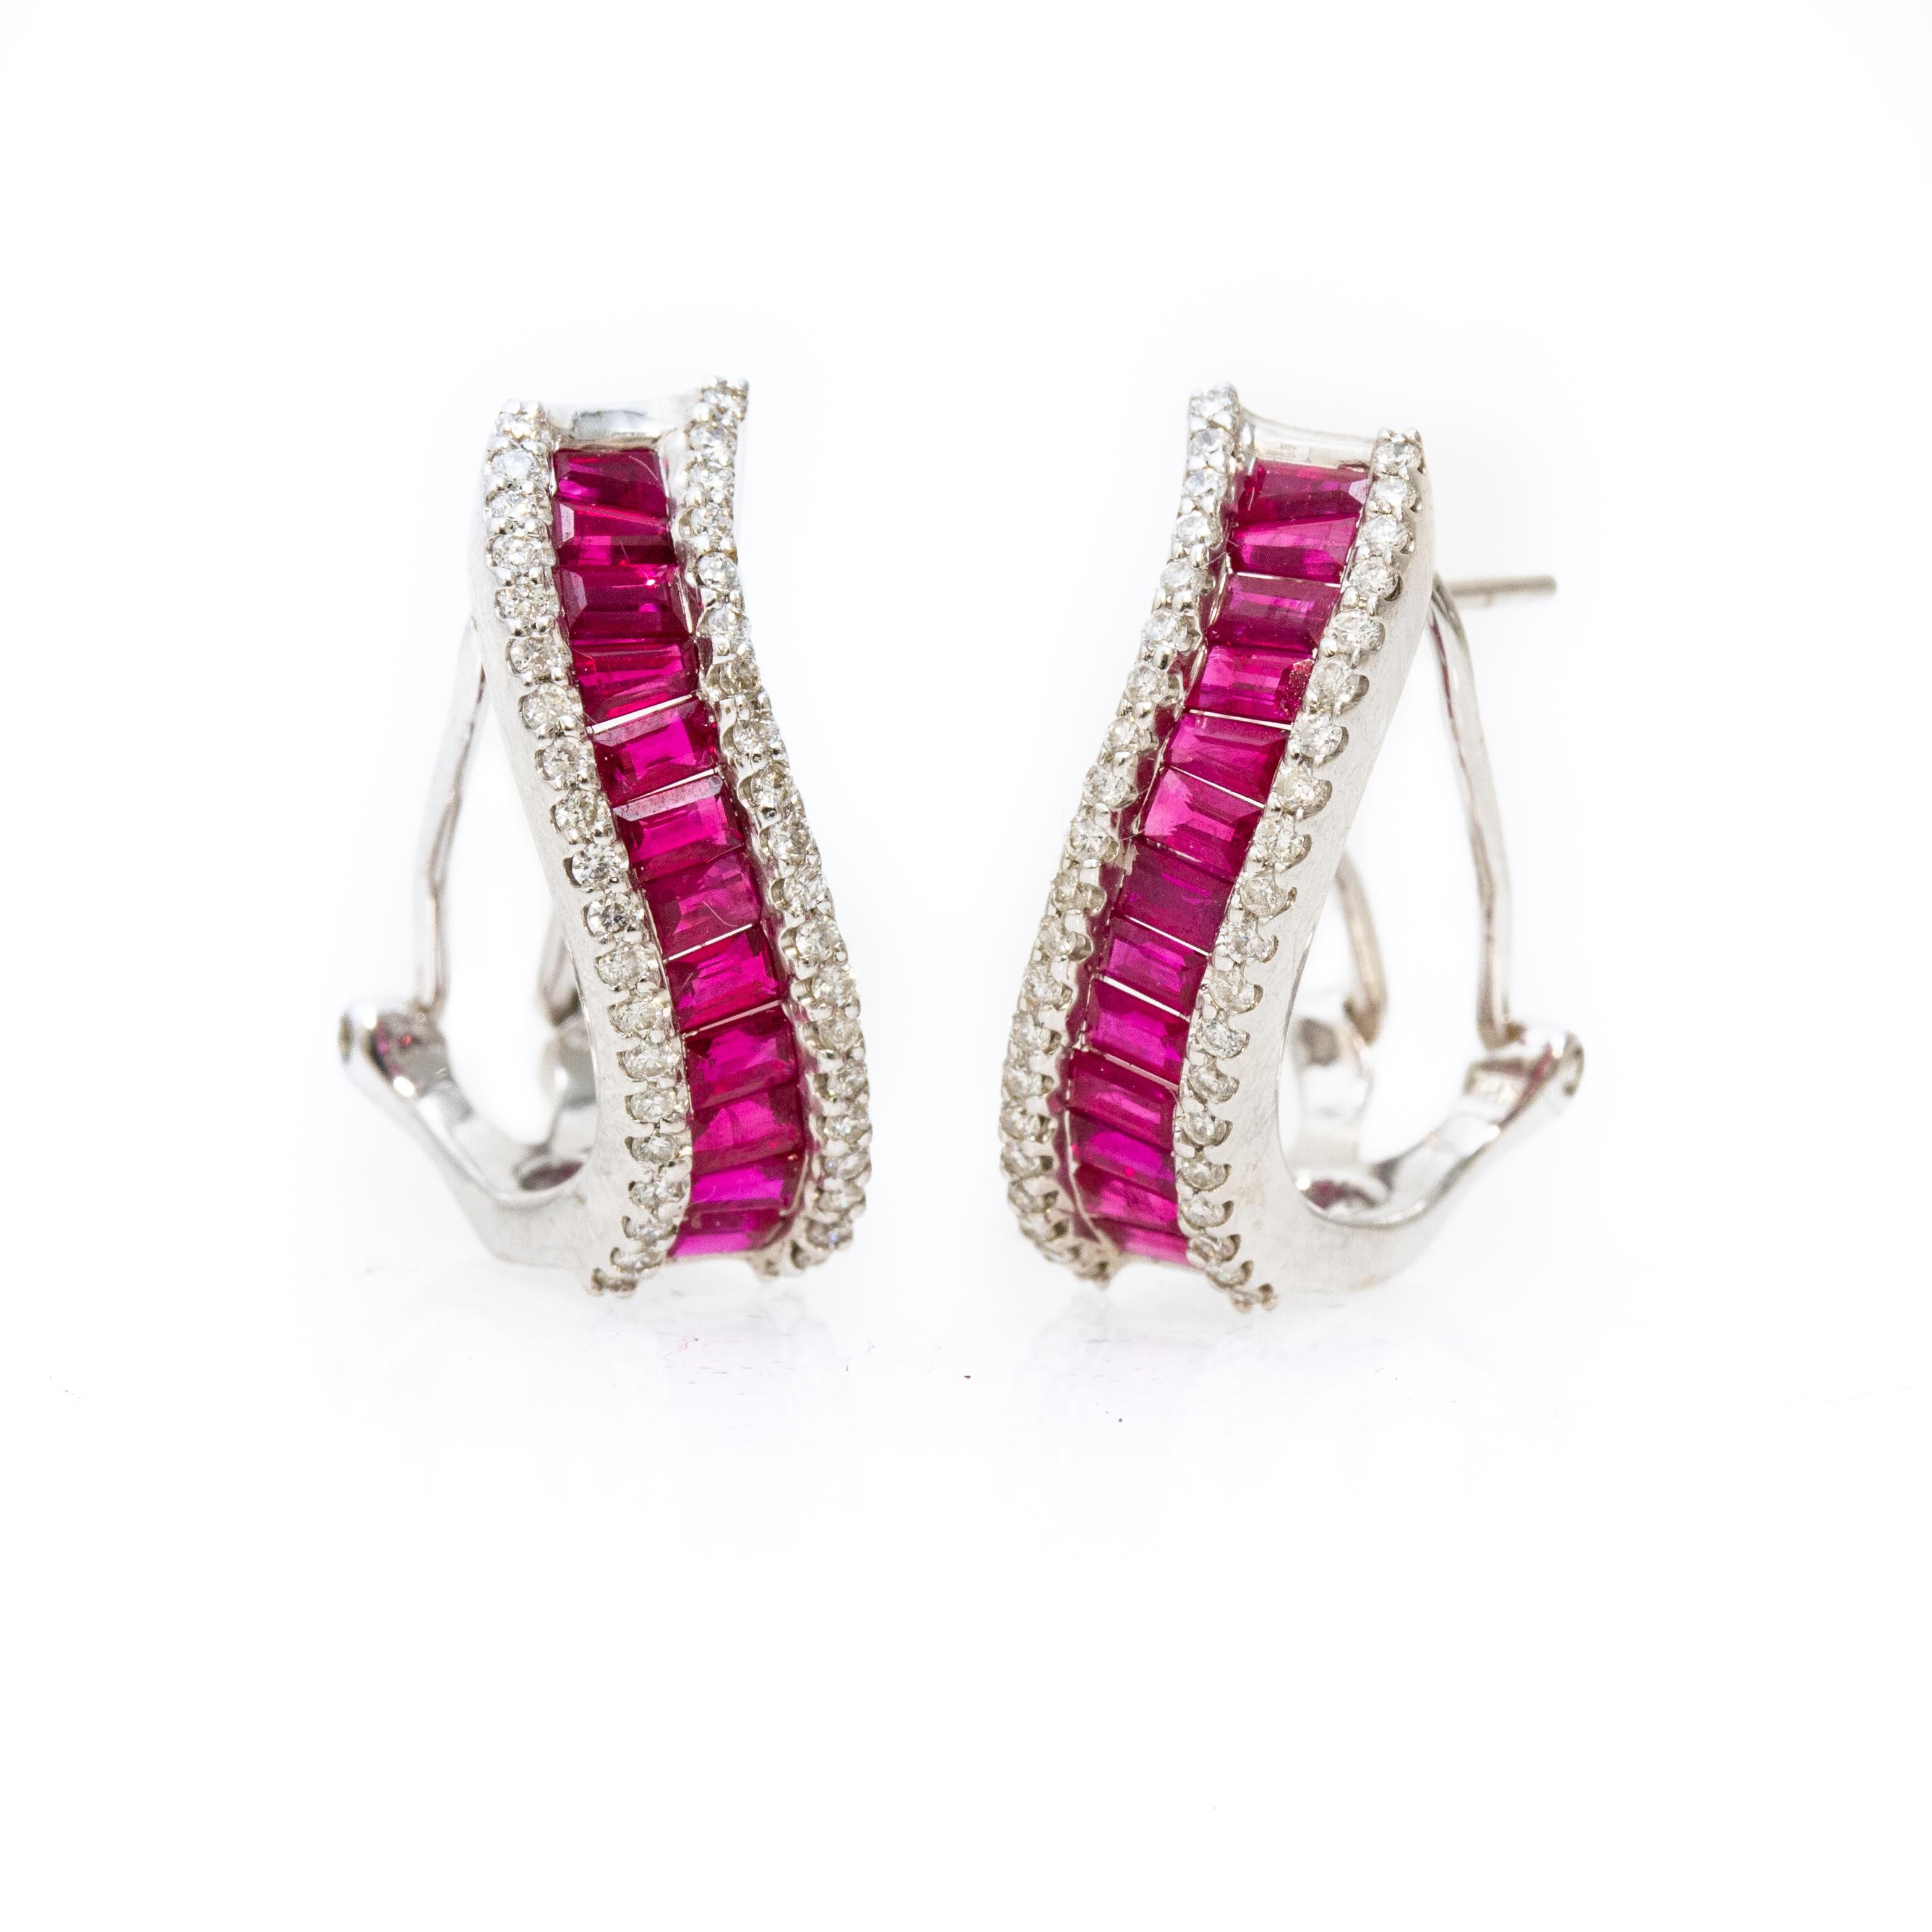 Offered is a pair of 18k white gold ruby and diamond clip earrings with over 100 stones 4.2dwt